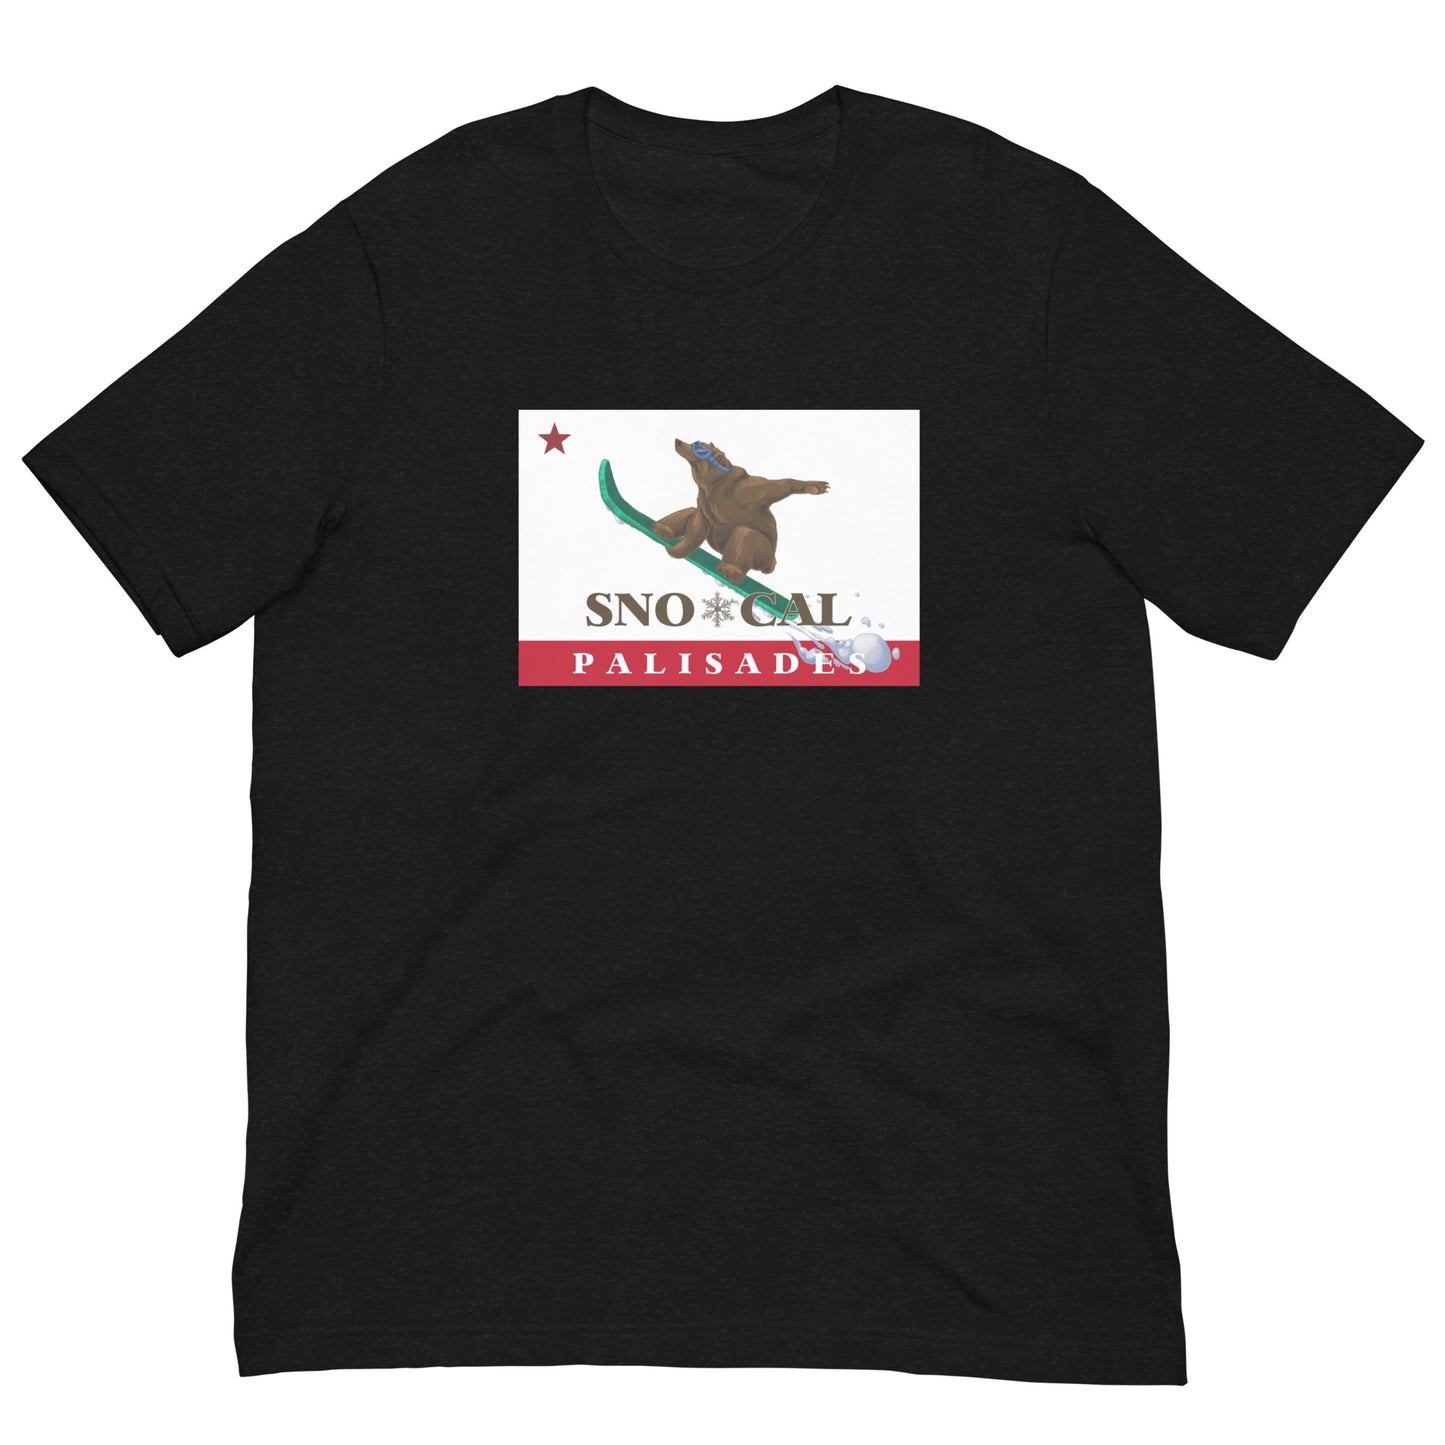 Palisades Sno*Cal Grizzly Boarding t-shirt